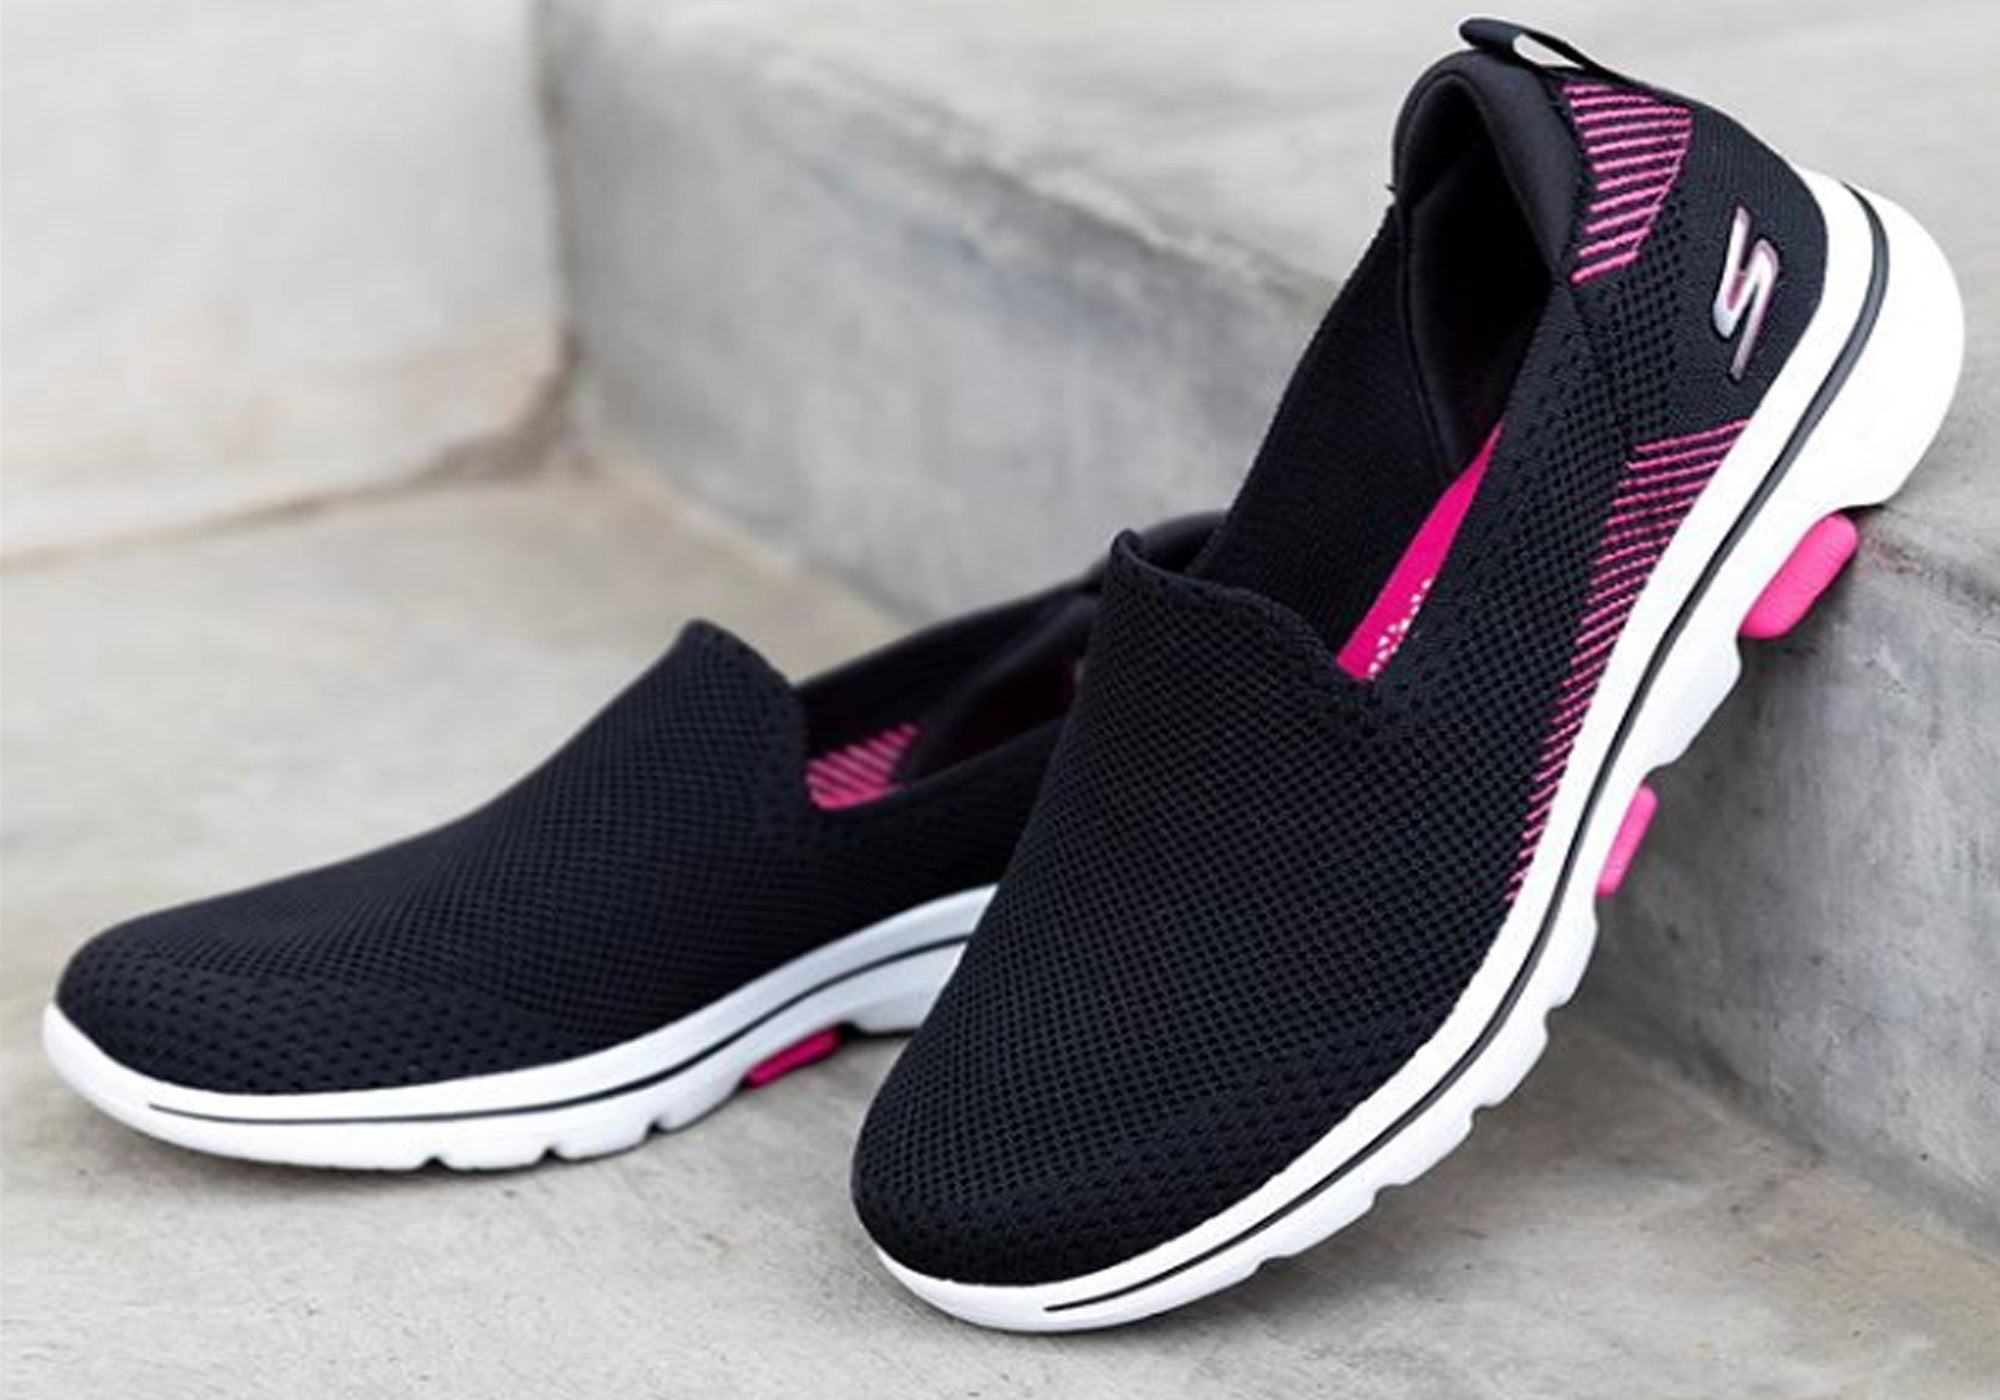 skechers go walk trainers review